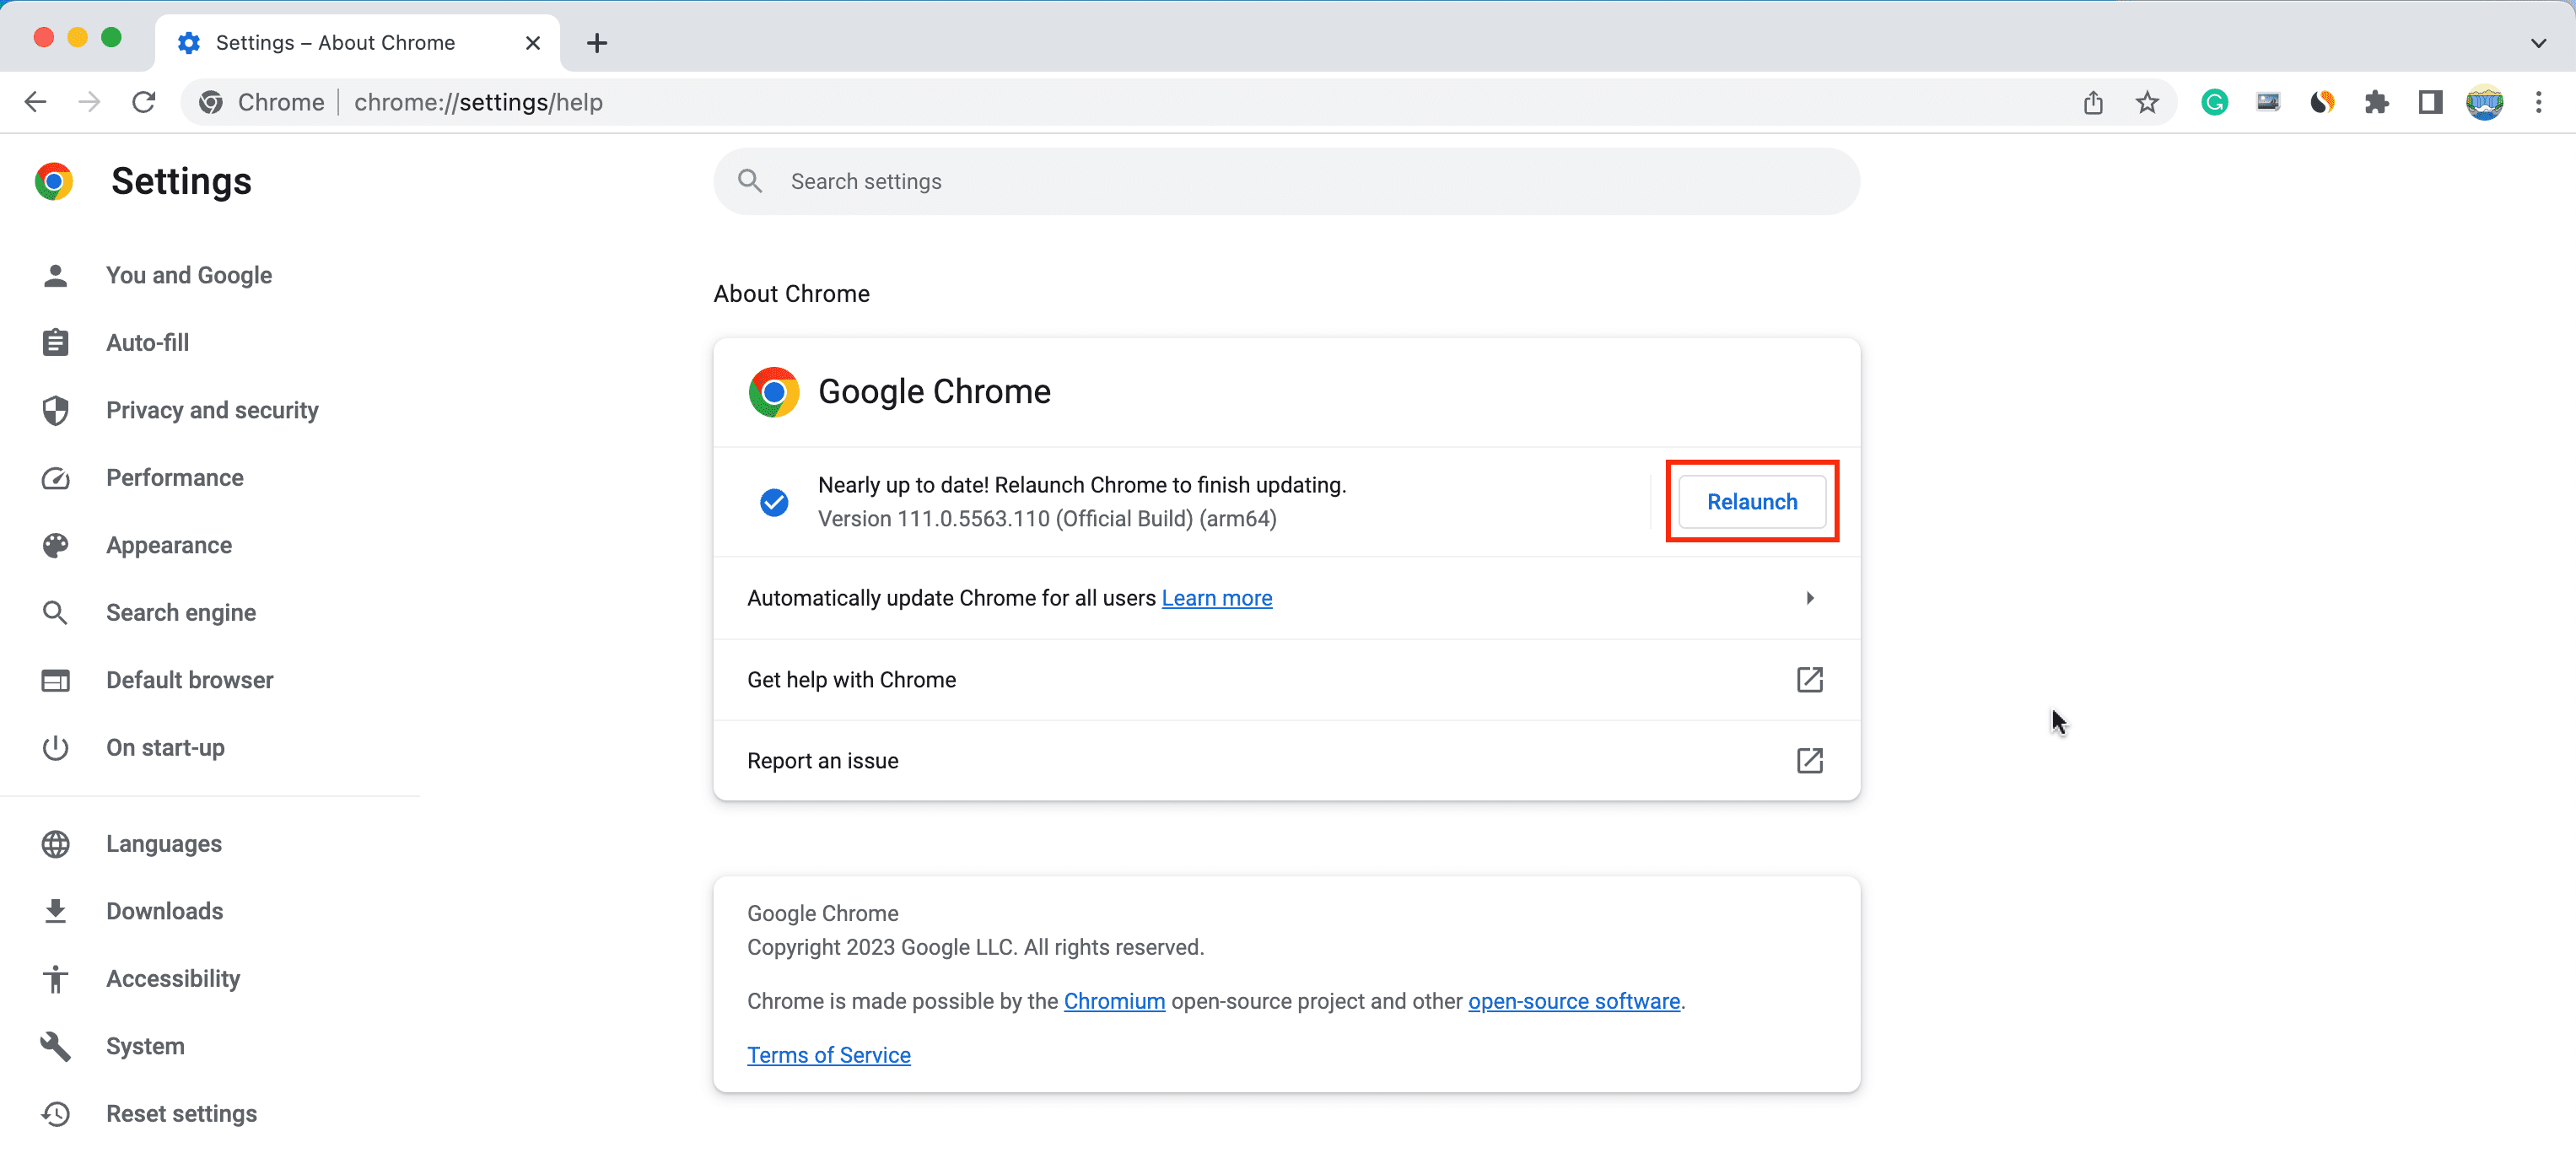 Chrome will automatically check for updates and install them if available.
Once the update is complete, relaunch Chrome and check if the error is fixed.